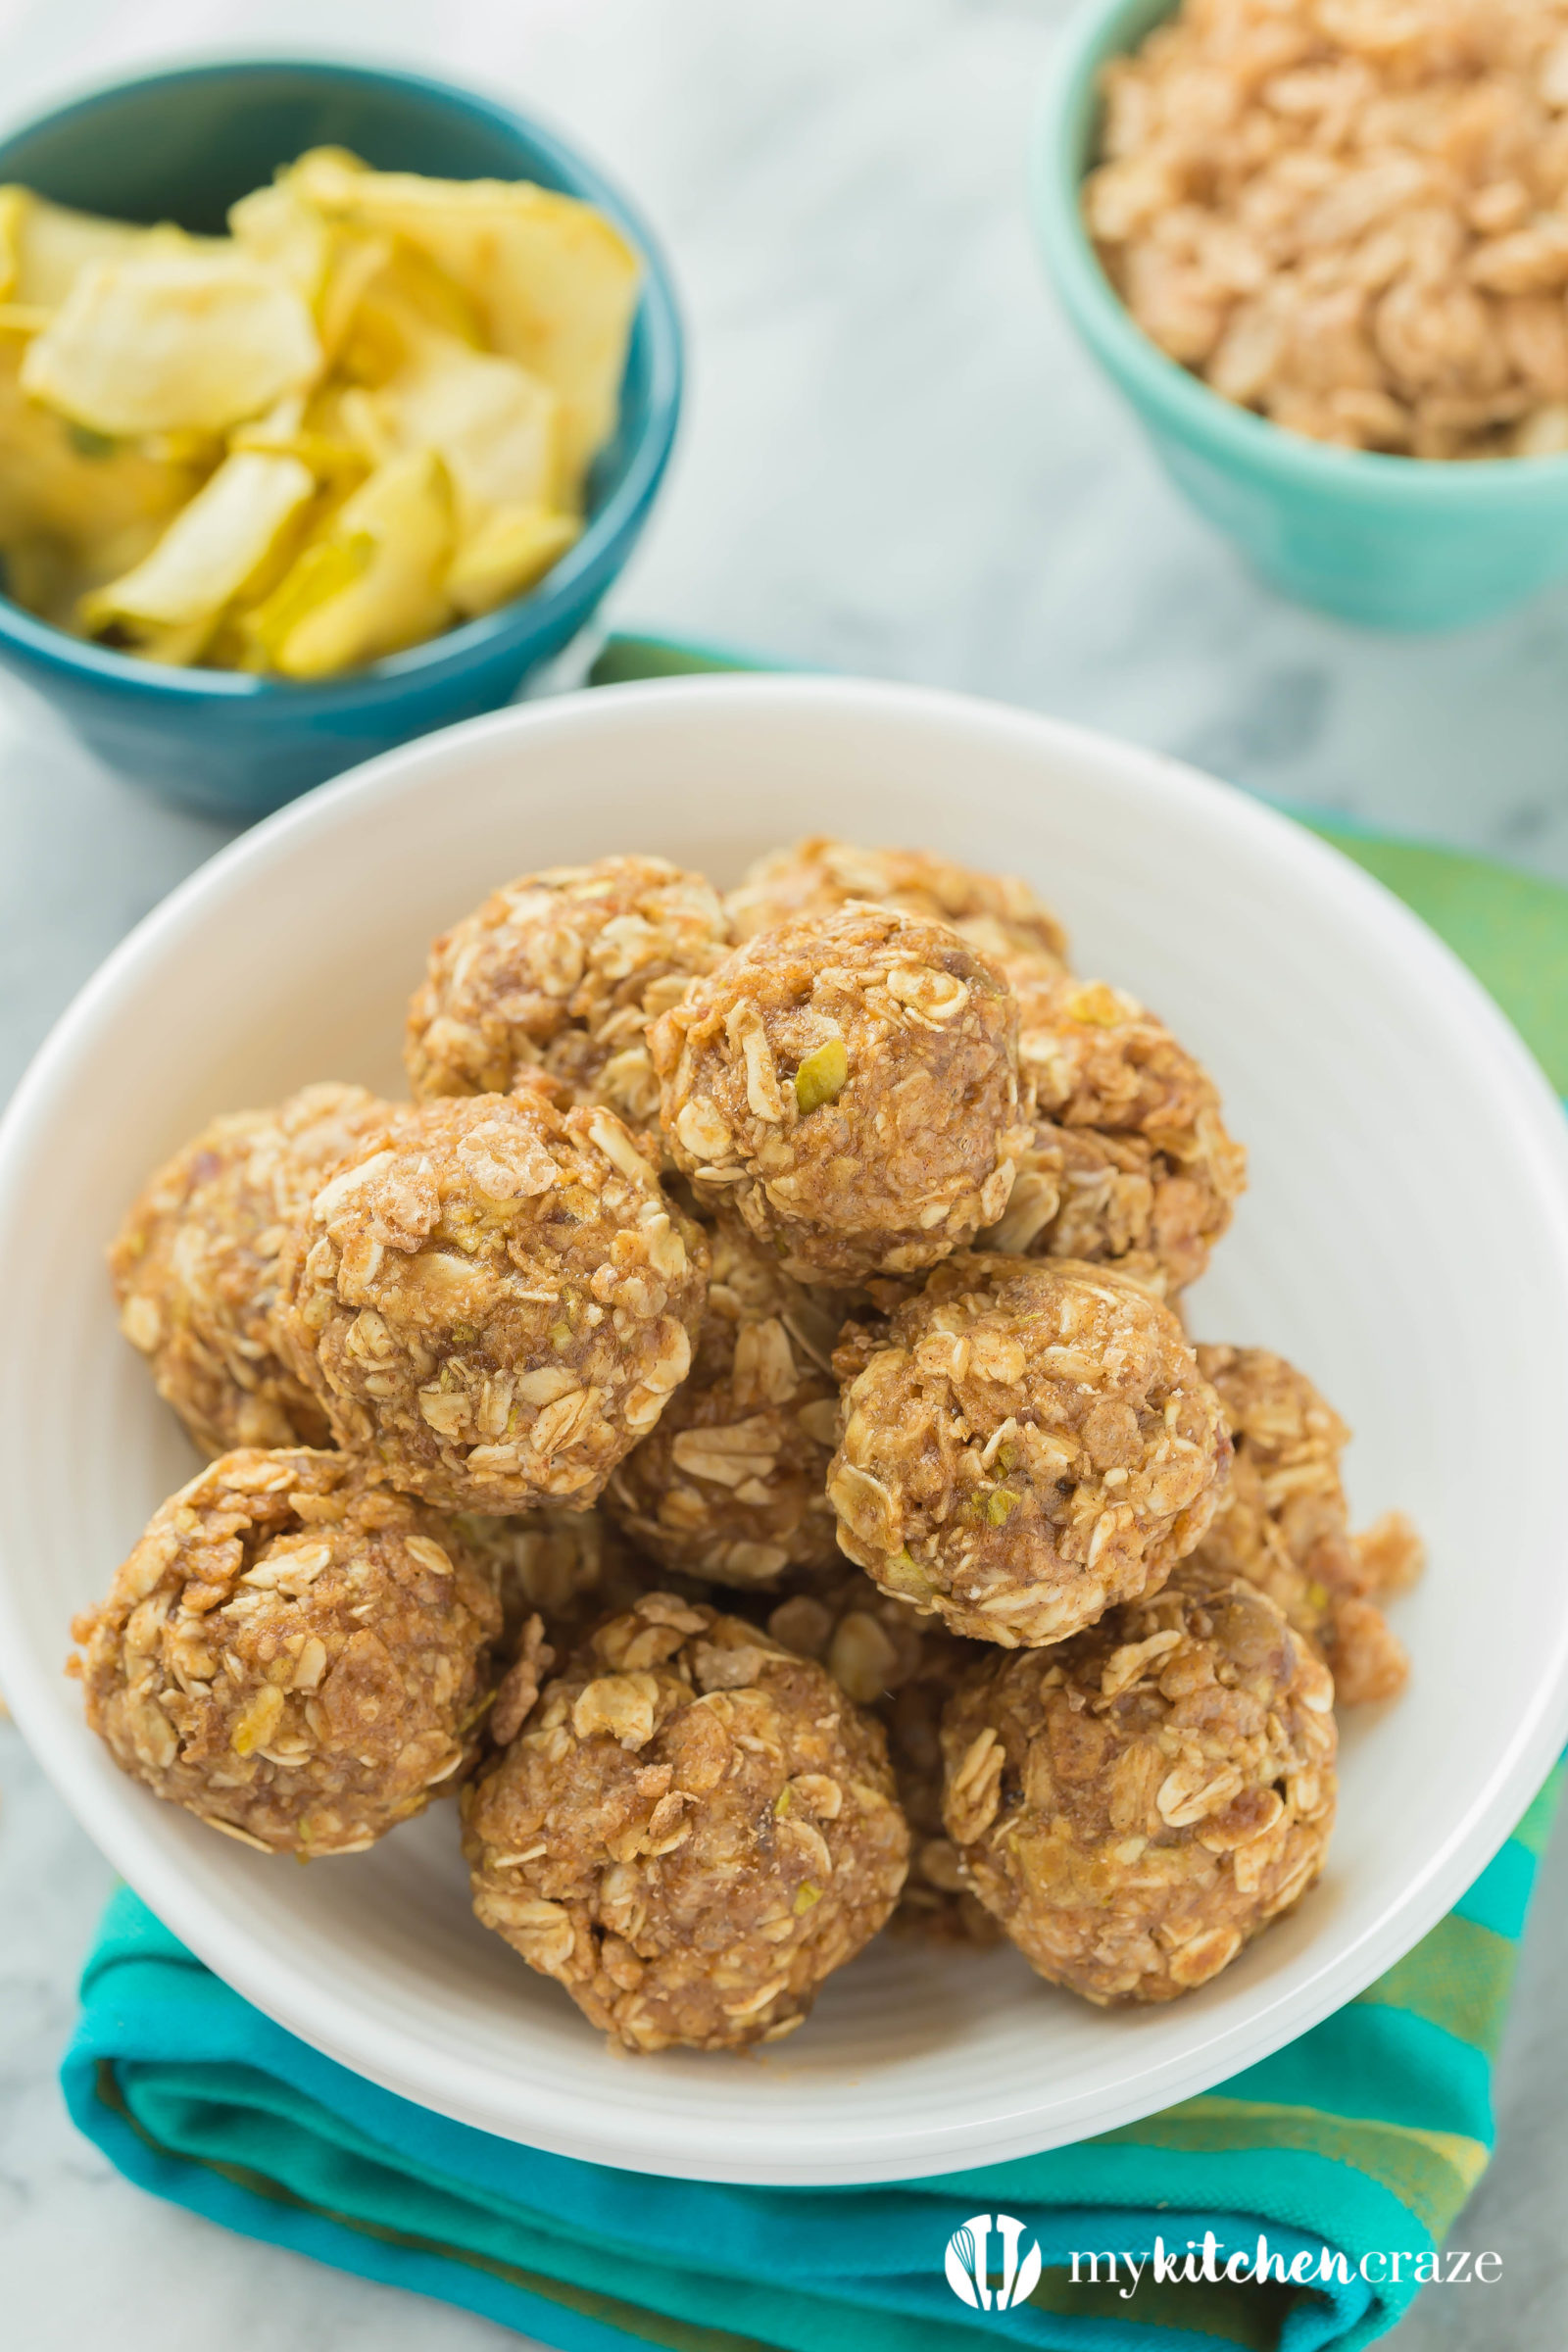 Apple & Dates Snack Bites ~ Packed with apples, dates, Cinnamon Pebbles, oats, and spices, these bite-sized snacks are delicious and will boost your energy to get you through the day.